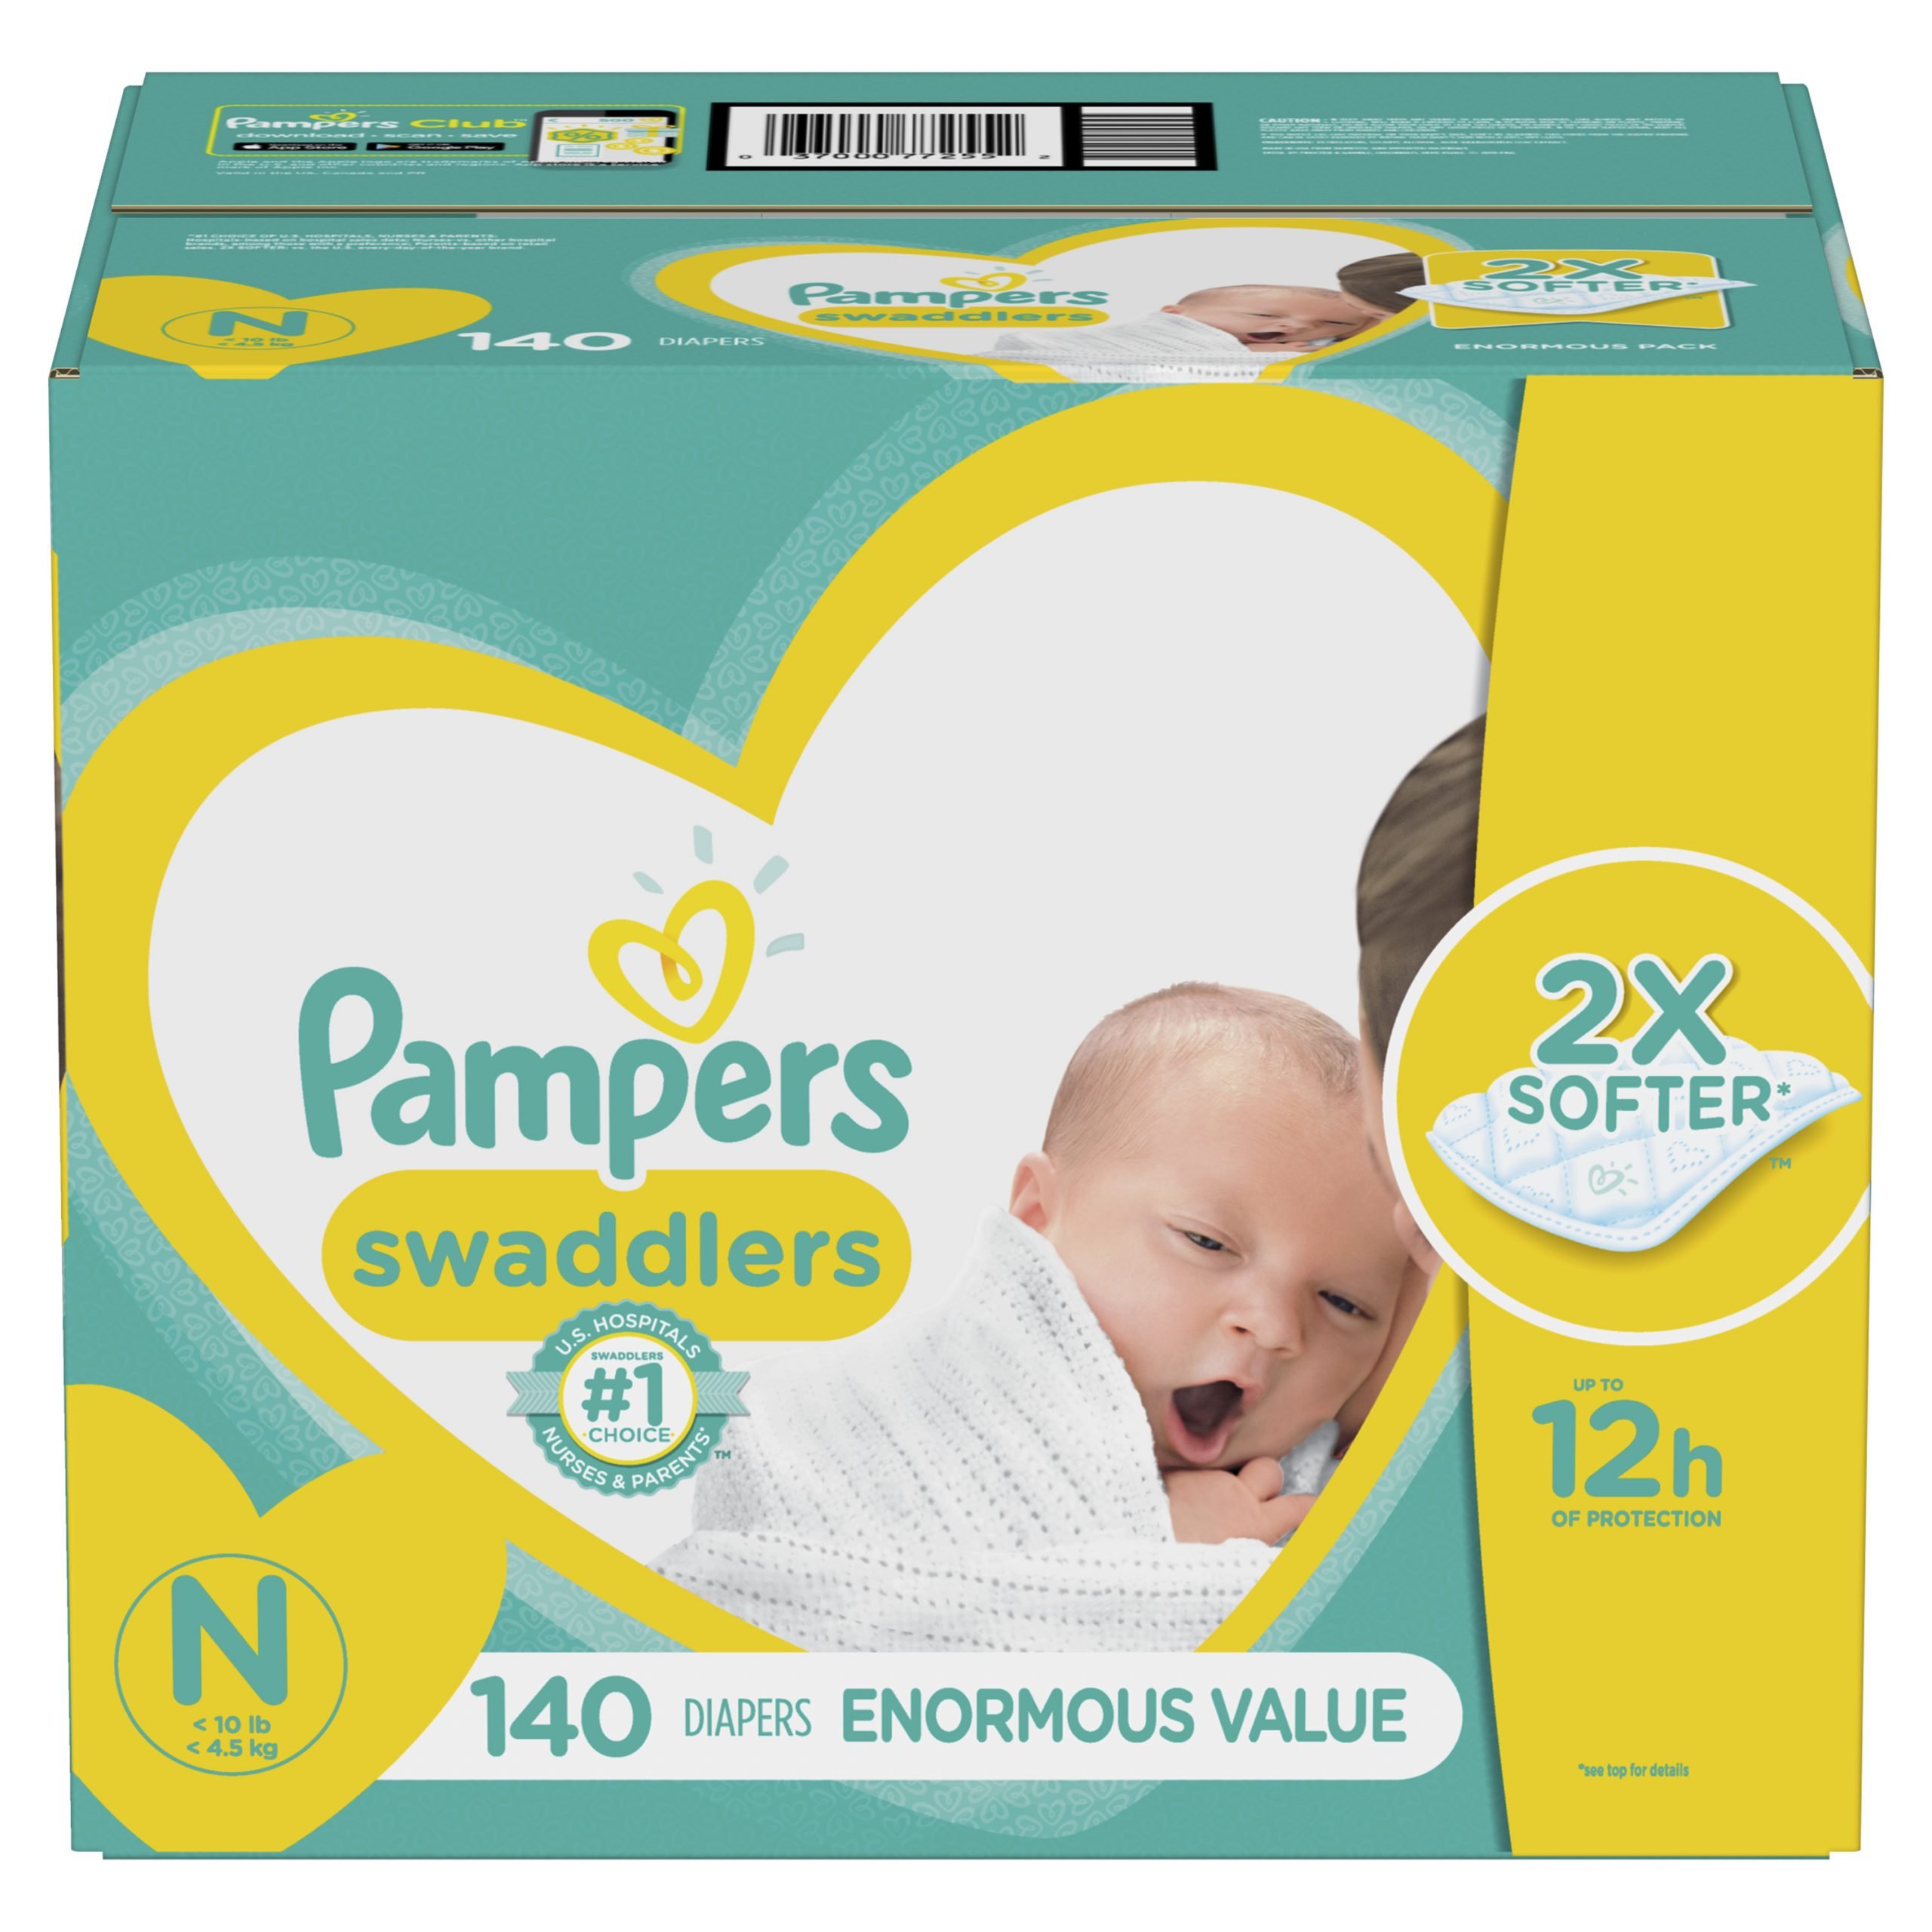 Pampers Swaddlers Soft and Absorbent Diapers, Size N, 140 Ct